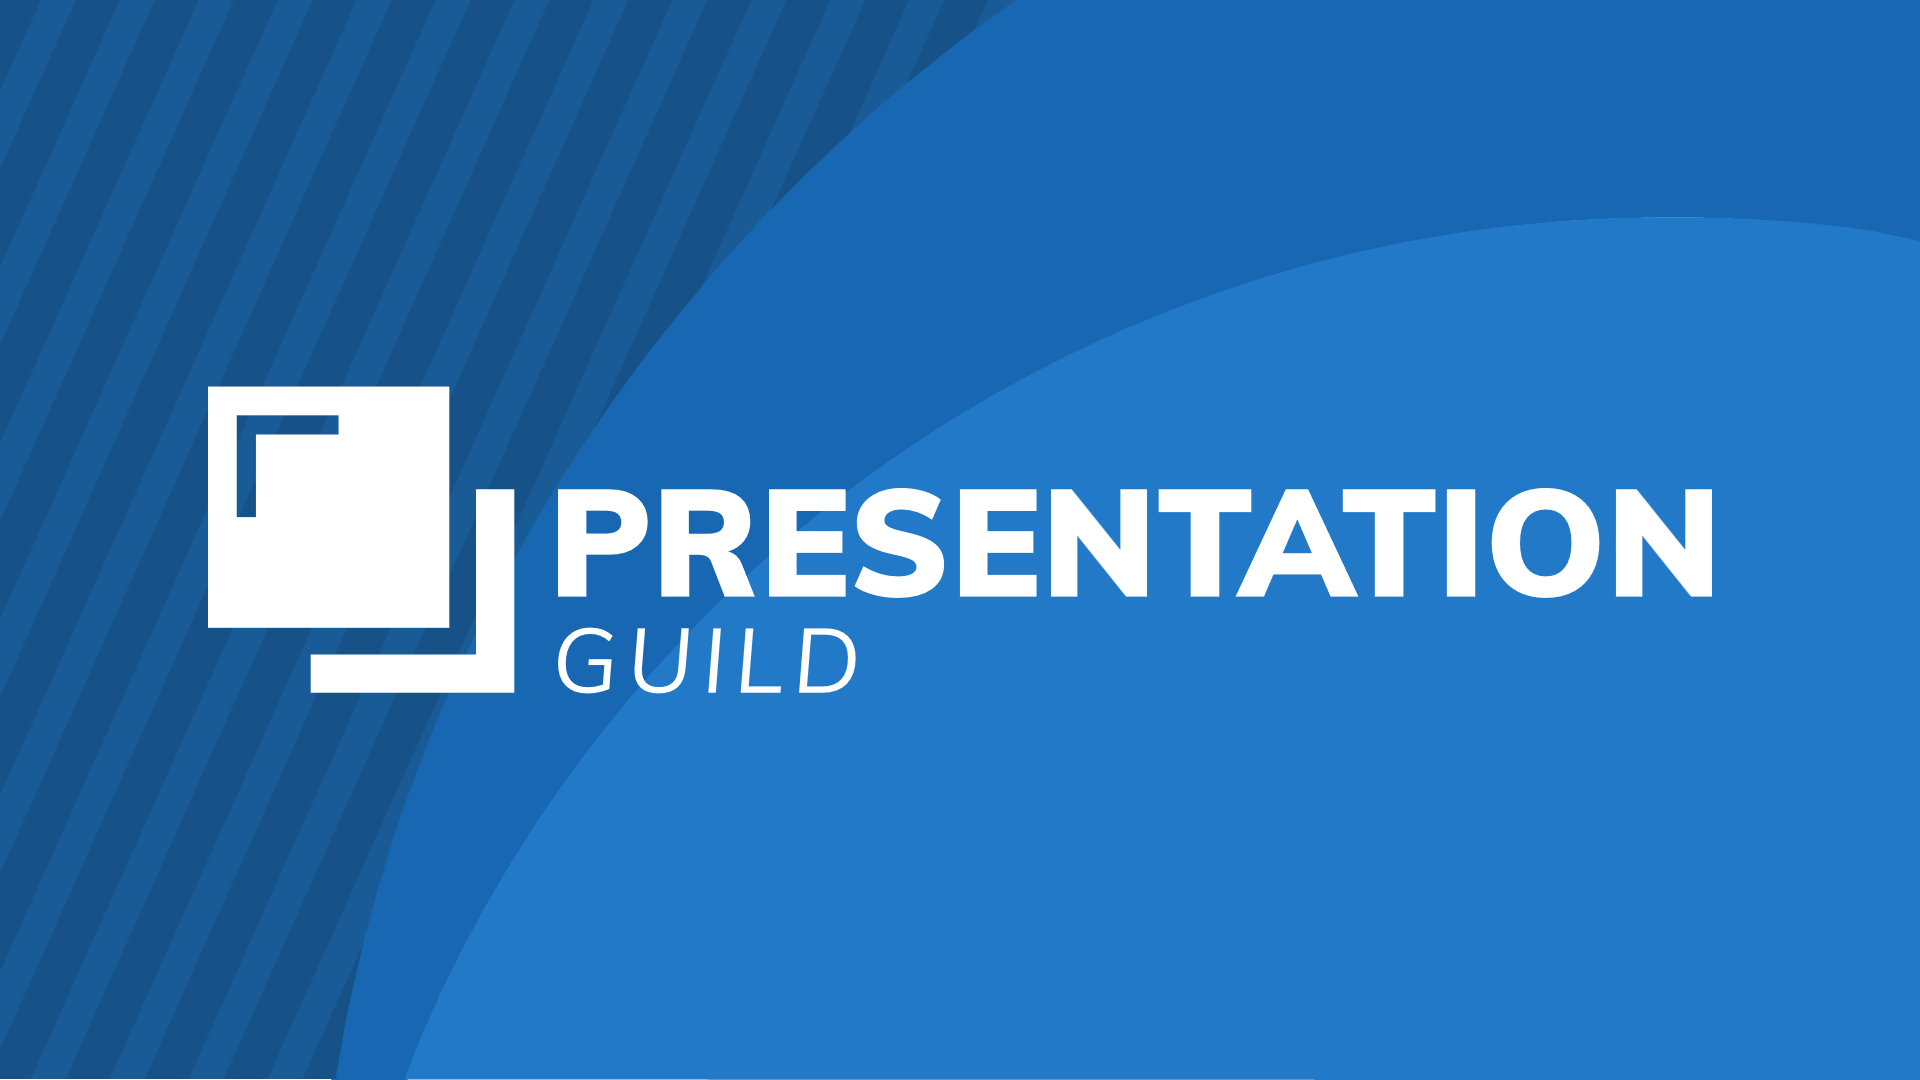 Behind the scenes of the Presentation Guild brand update